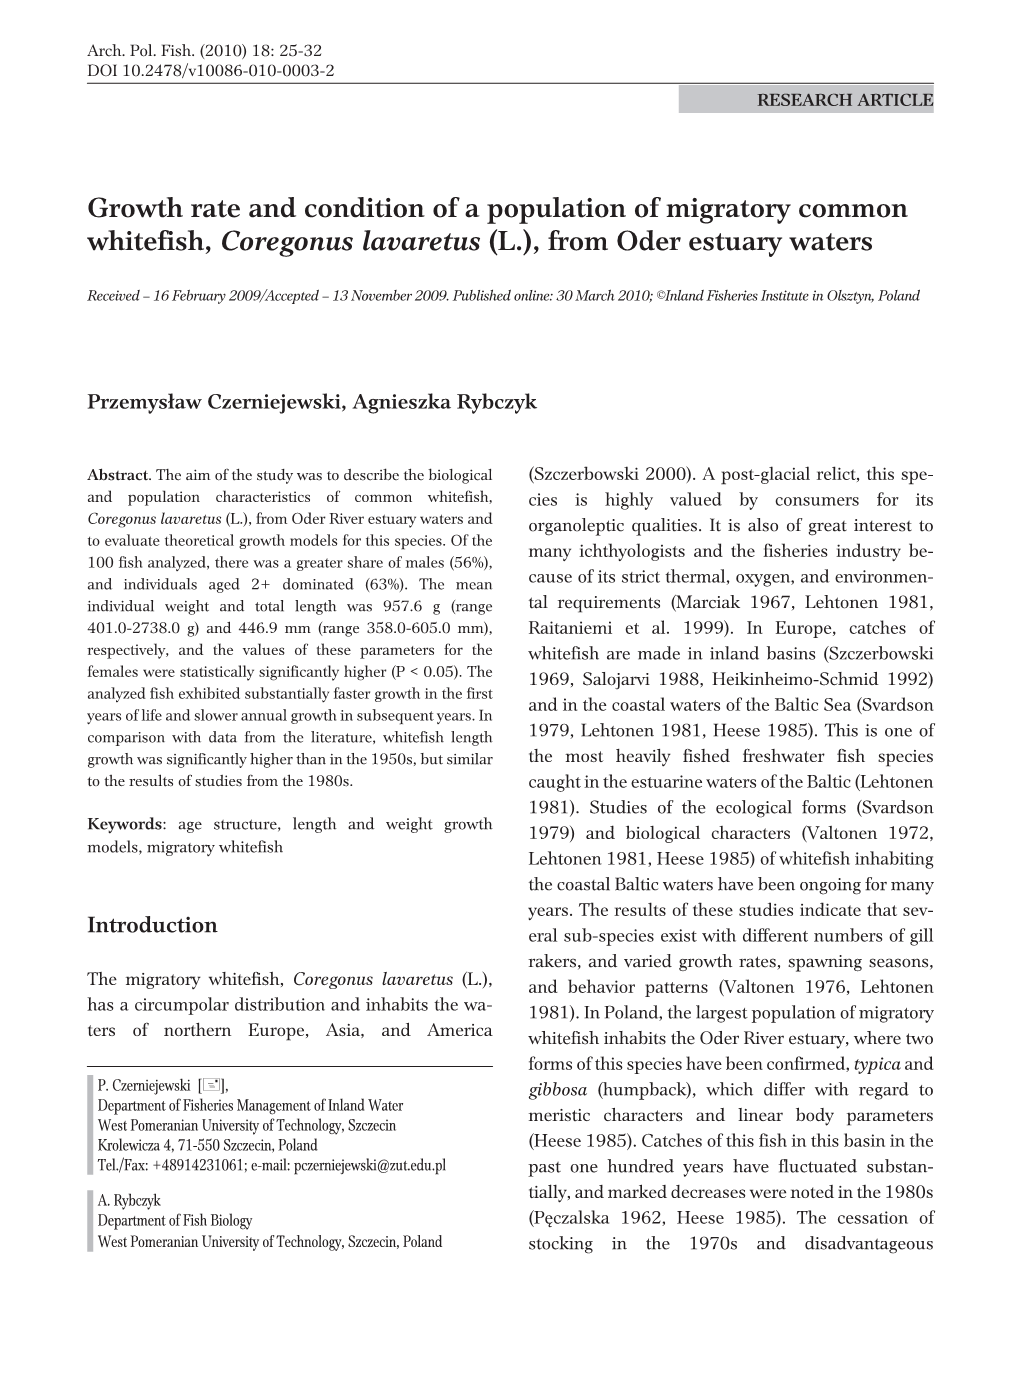 Growth Rate and Condition of a Population of Migratory Common Whitefish, Coregonus Lavaretus (L.), from Oder Estuary Waters